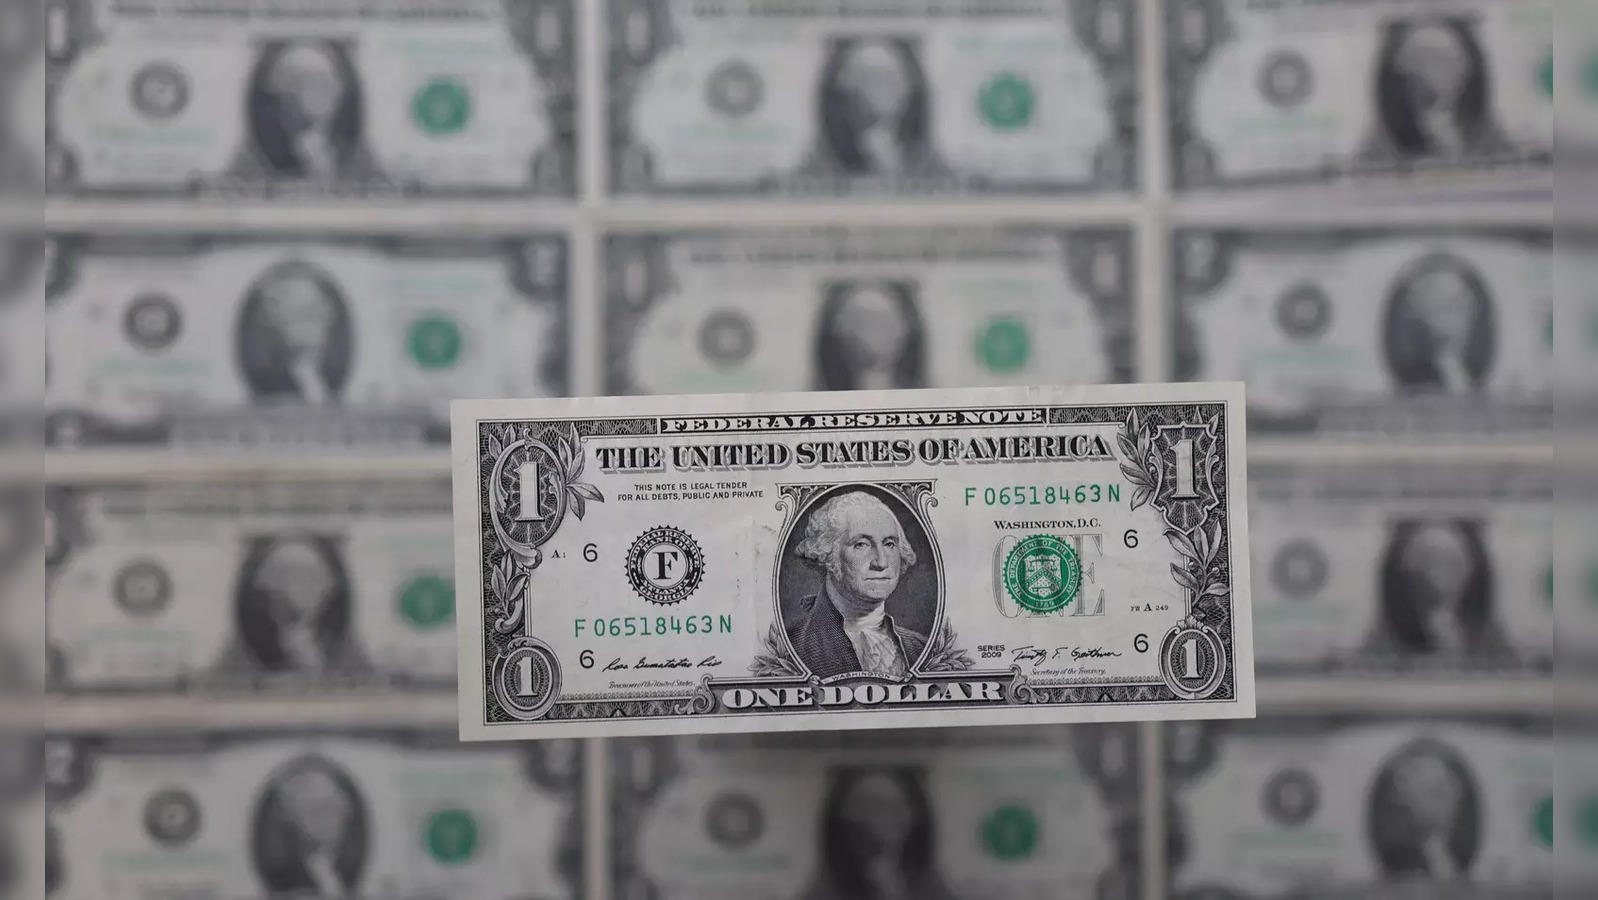 Two identical $1 bills could be worth up to $150,000: what to